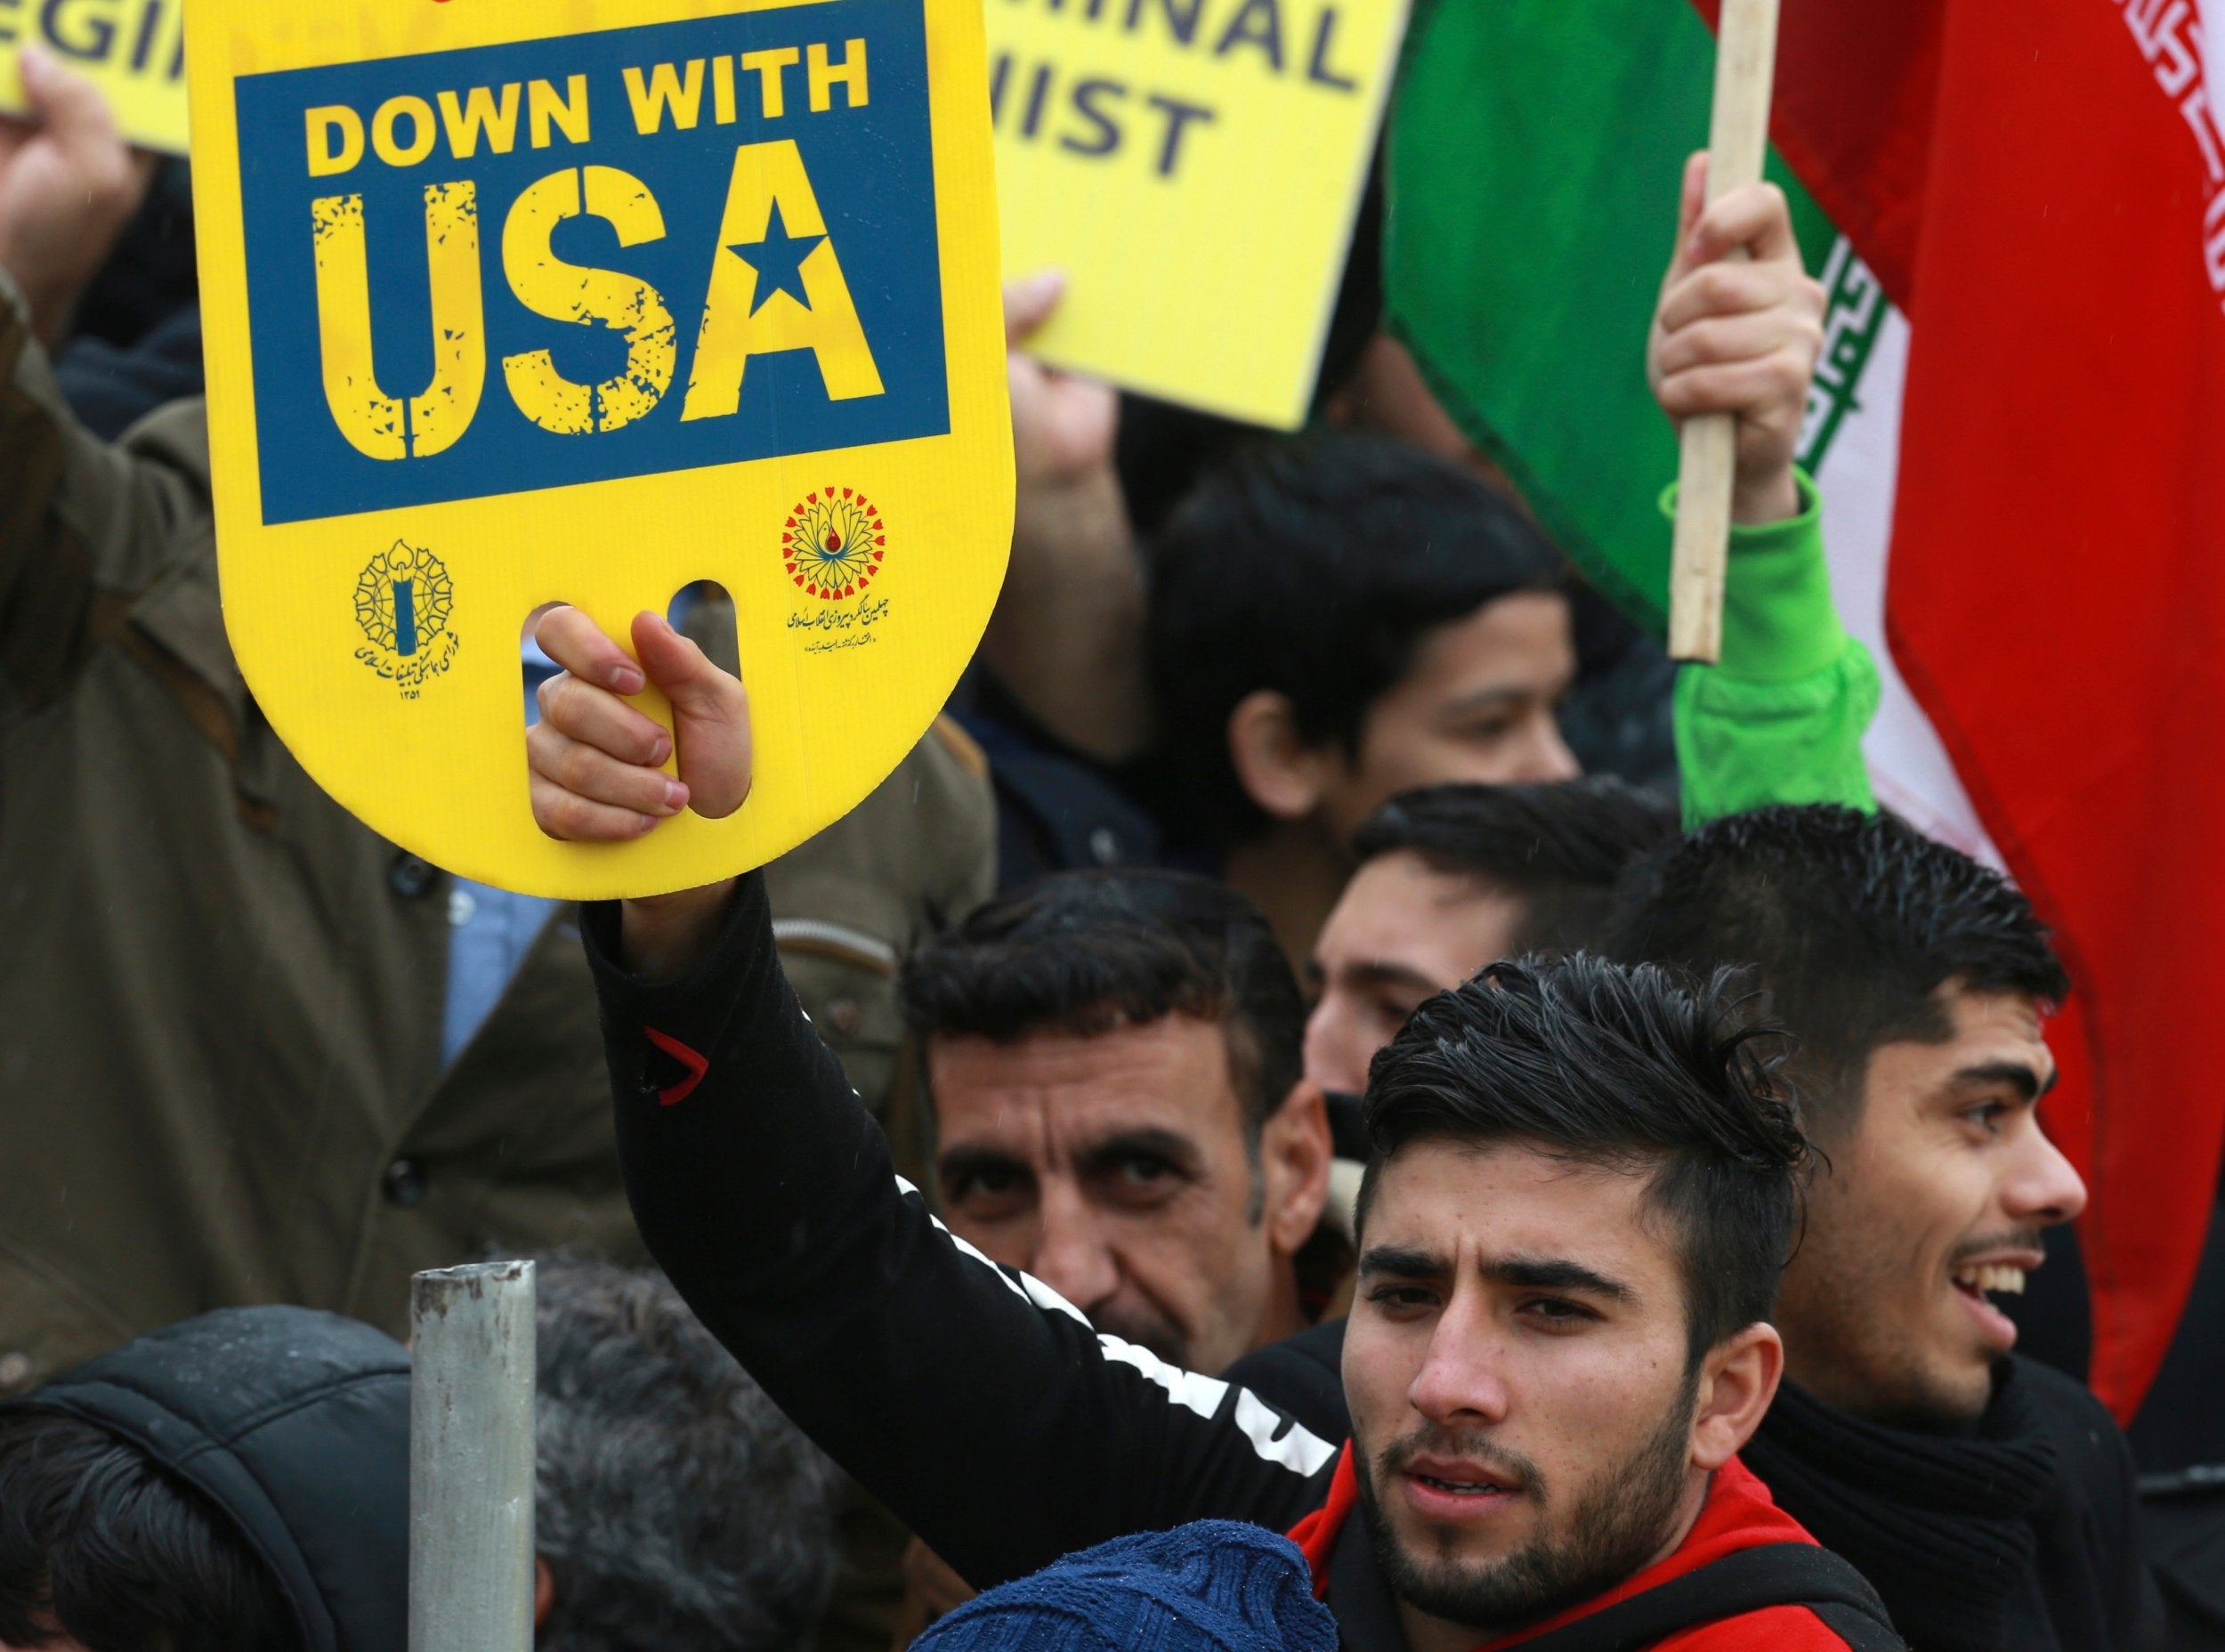 A demonstrator holds an anti-U.S. placard during a ceremony celebrating the 40th anniversary of the Islamic Revolution in Tehran, Iran.